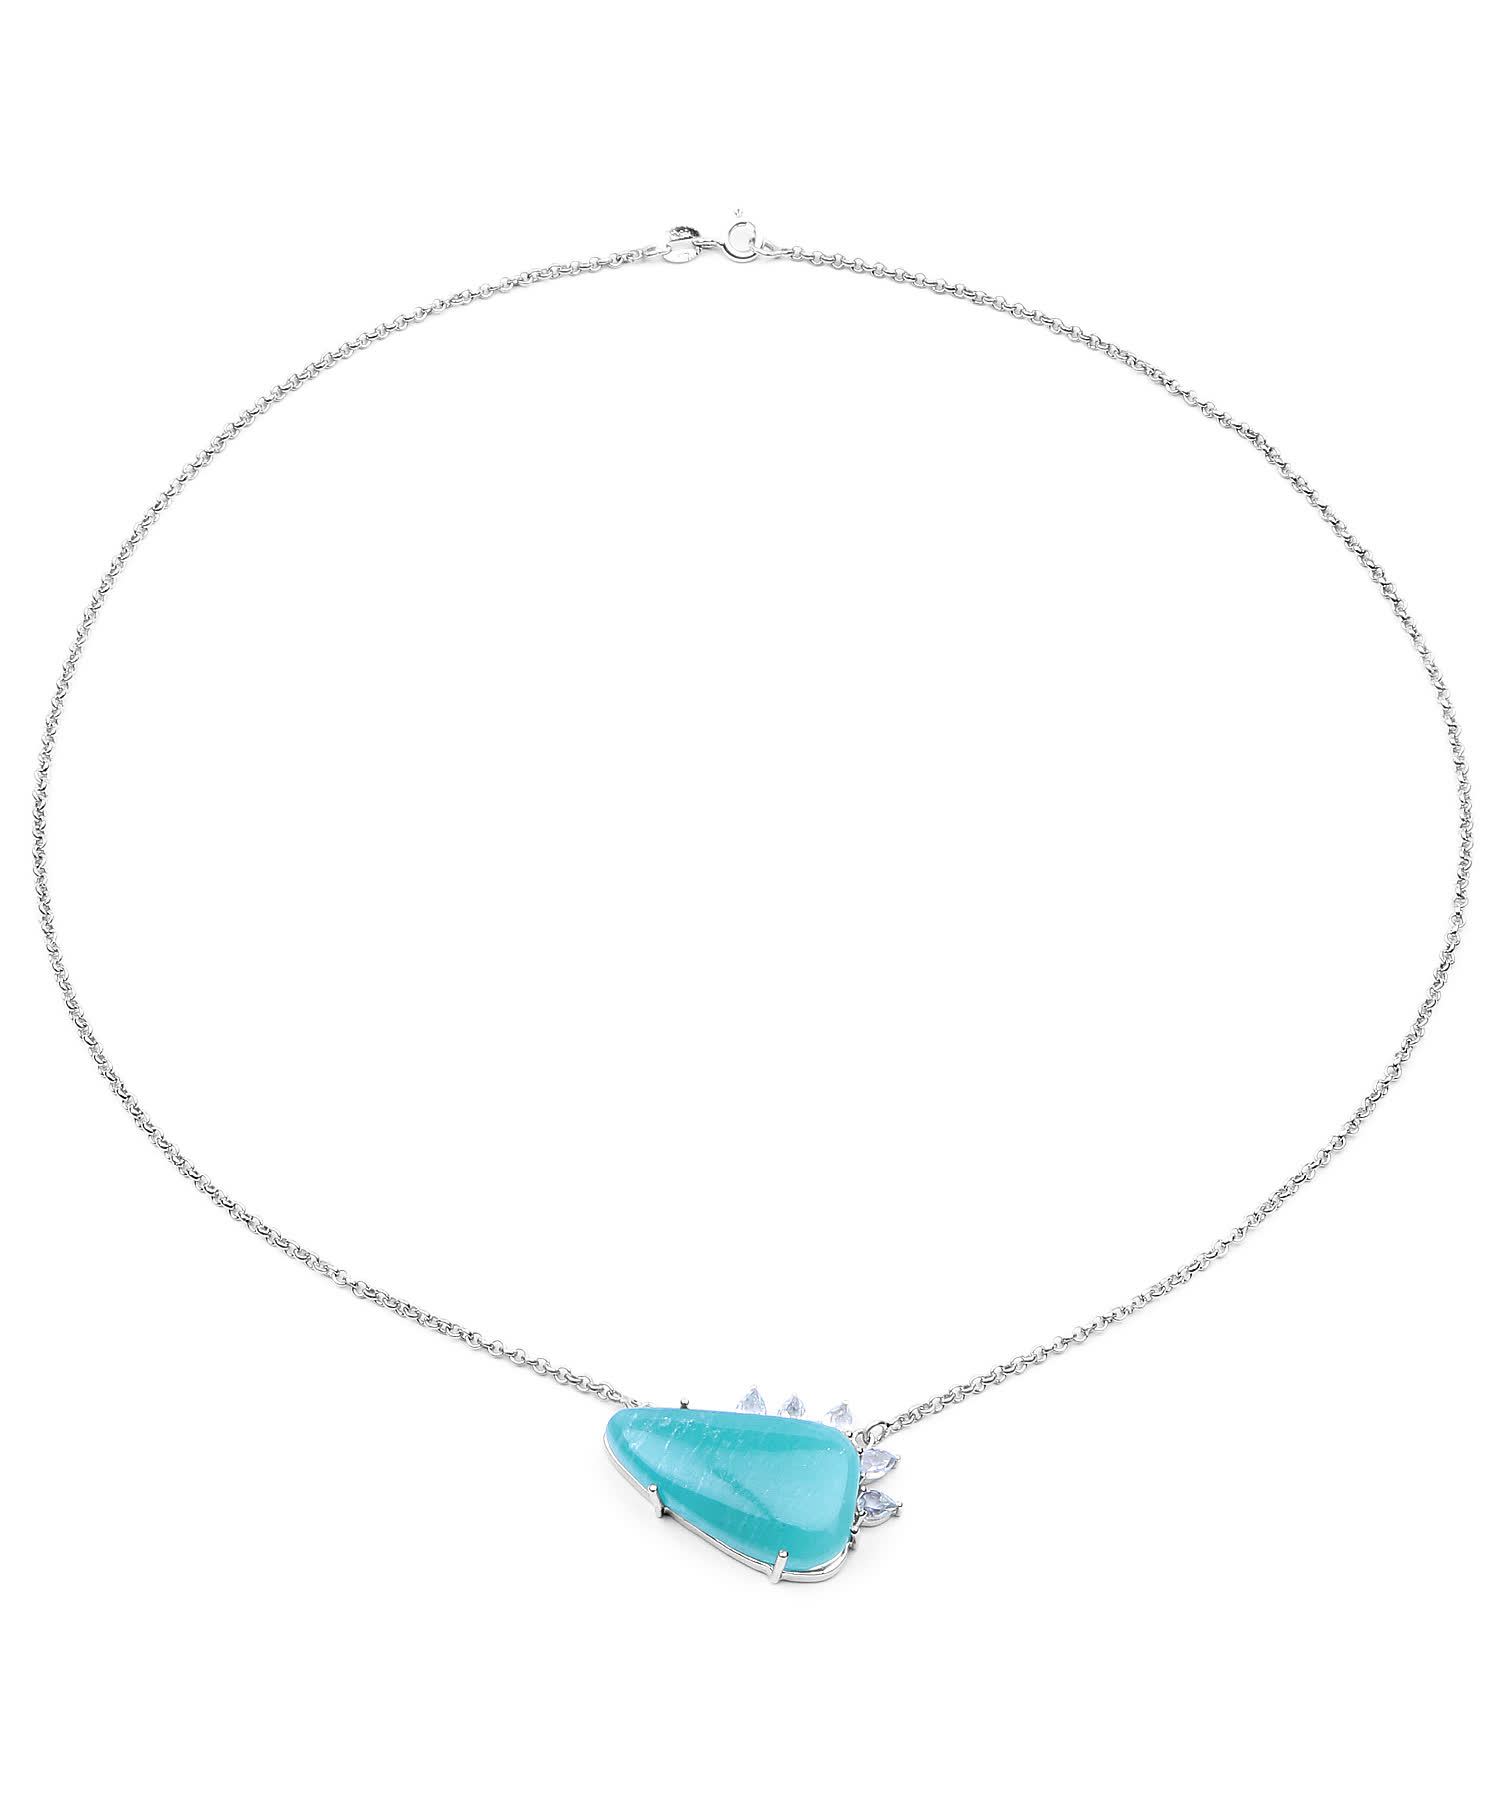 13.41ctw Natural Amazonite and Topaz Rhodium Plated 925 Sterling Silver Necklace View 2